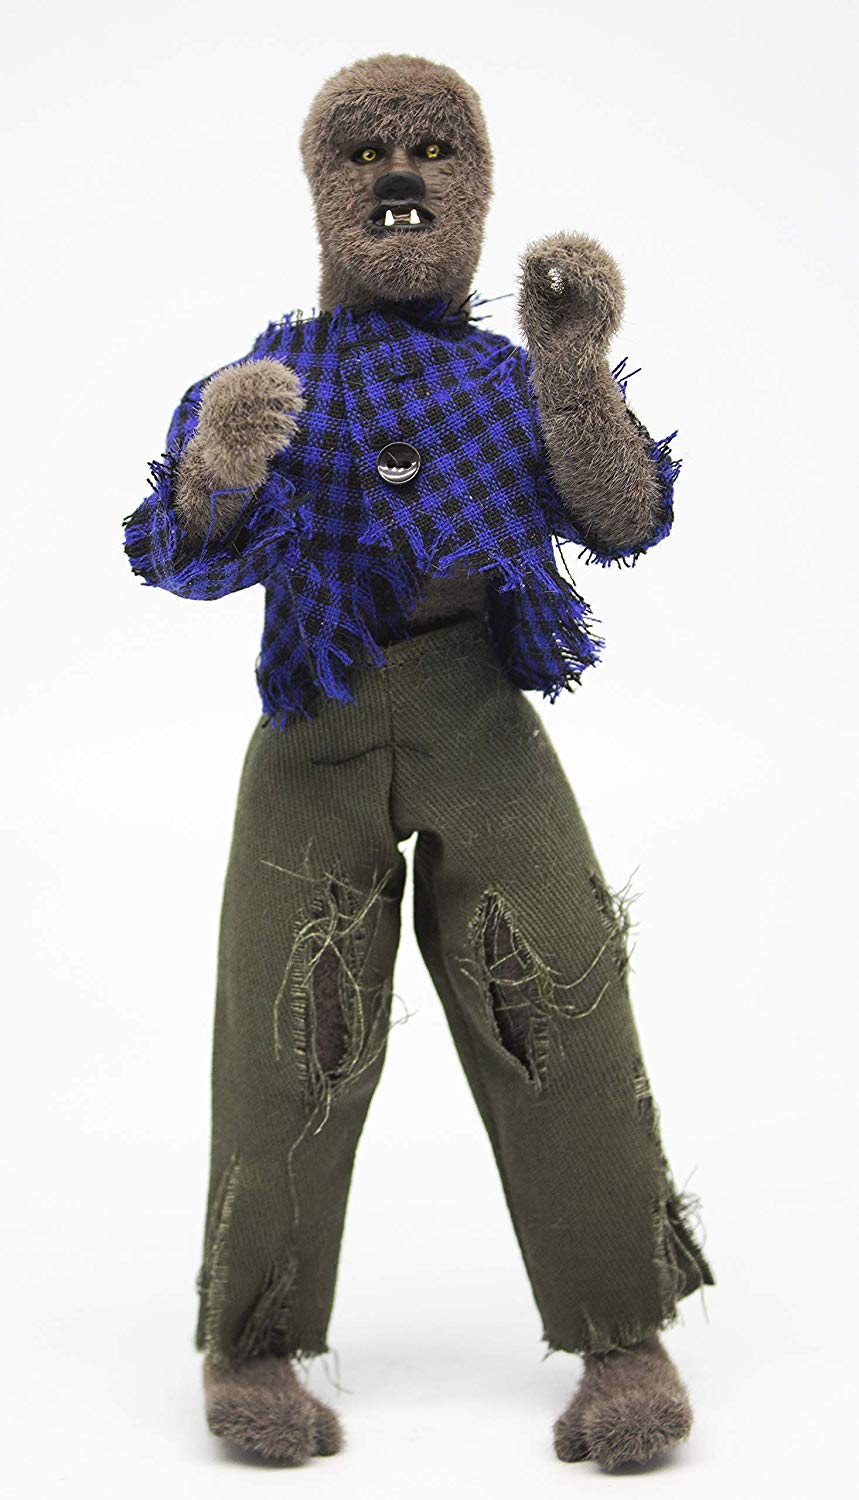 Mego Horror Wave 6 - The Face Of The Screaming Werewolf 8" Action Figure (Full Body Flock and New Outfit) - Zlc Collectibles